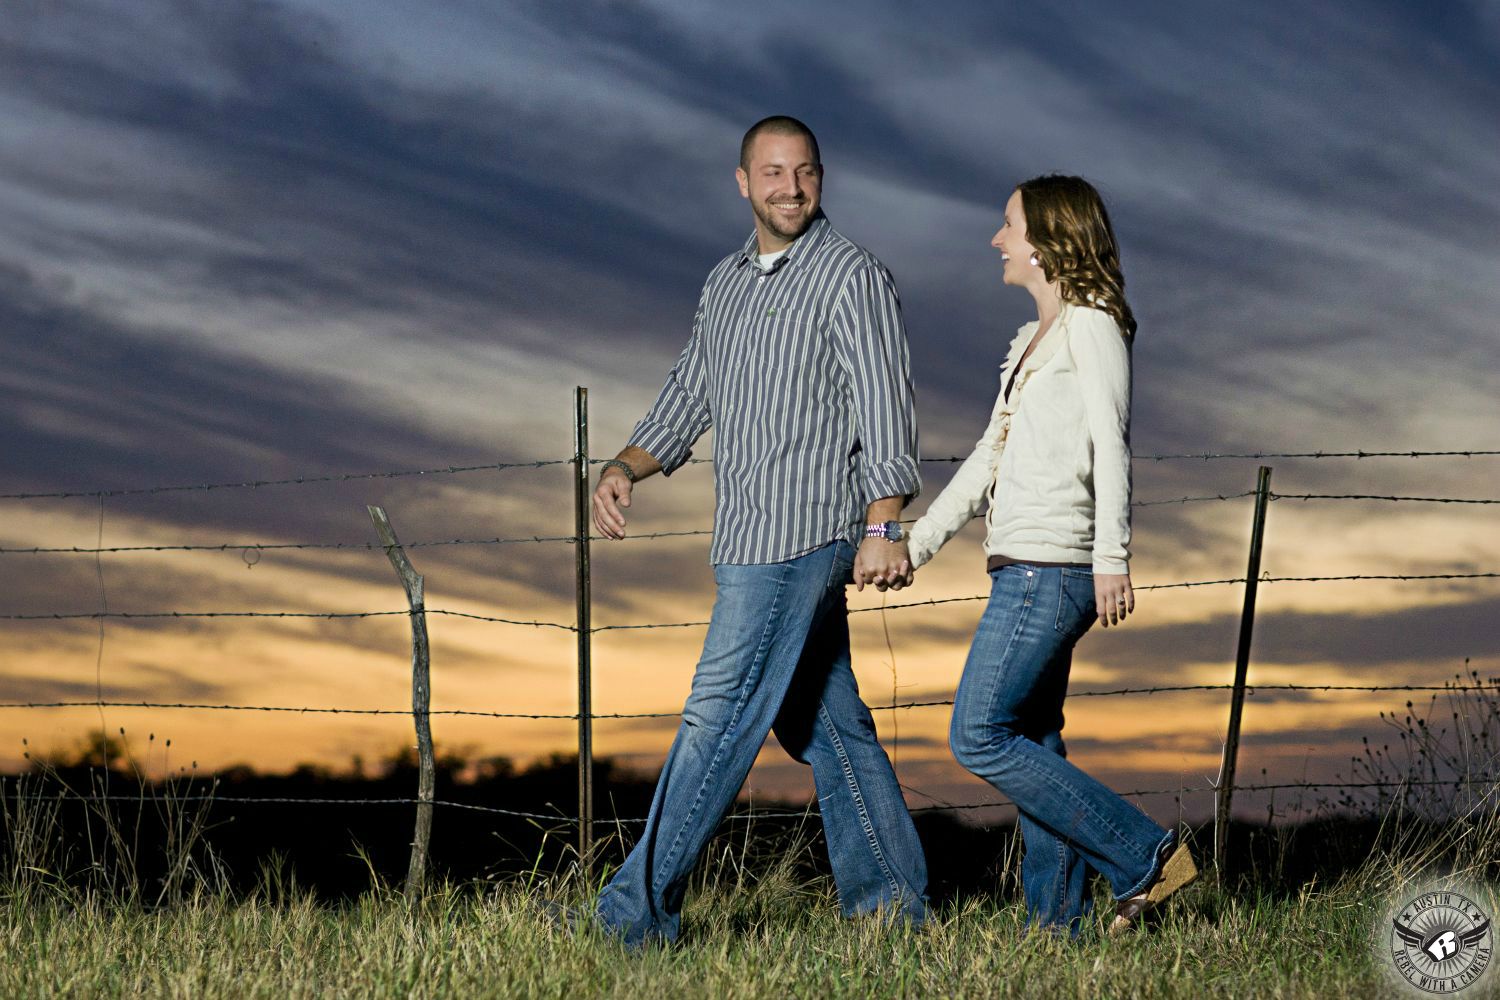 Guy with short cut dark hair wearing a striped white and grey button up dress shirt and blue jeans leads a dirty blond haired girl wearing a white low cut button down sweater with blue jeans along a fence in front of a cloudy orange and blue and grey sunset near Georgetown Texas in this colorful engagement photograph in rural Austin, Texas.